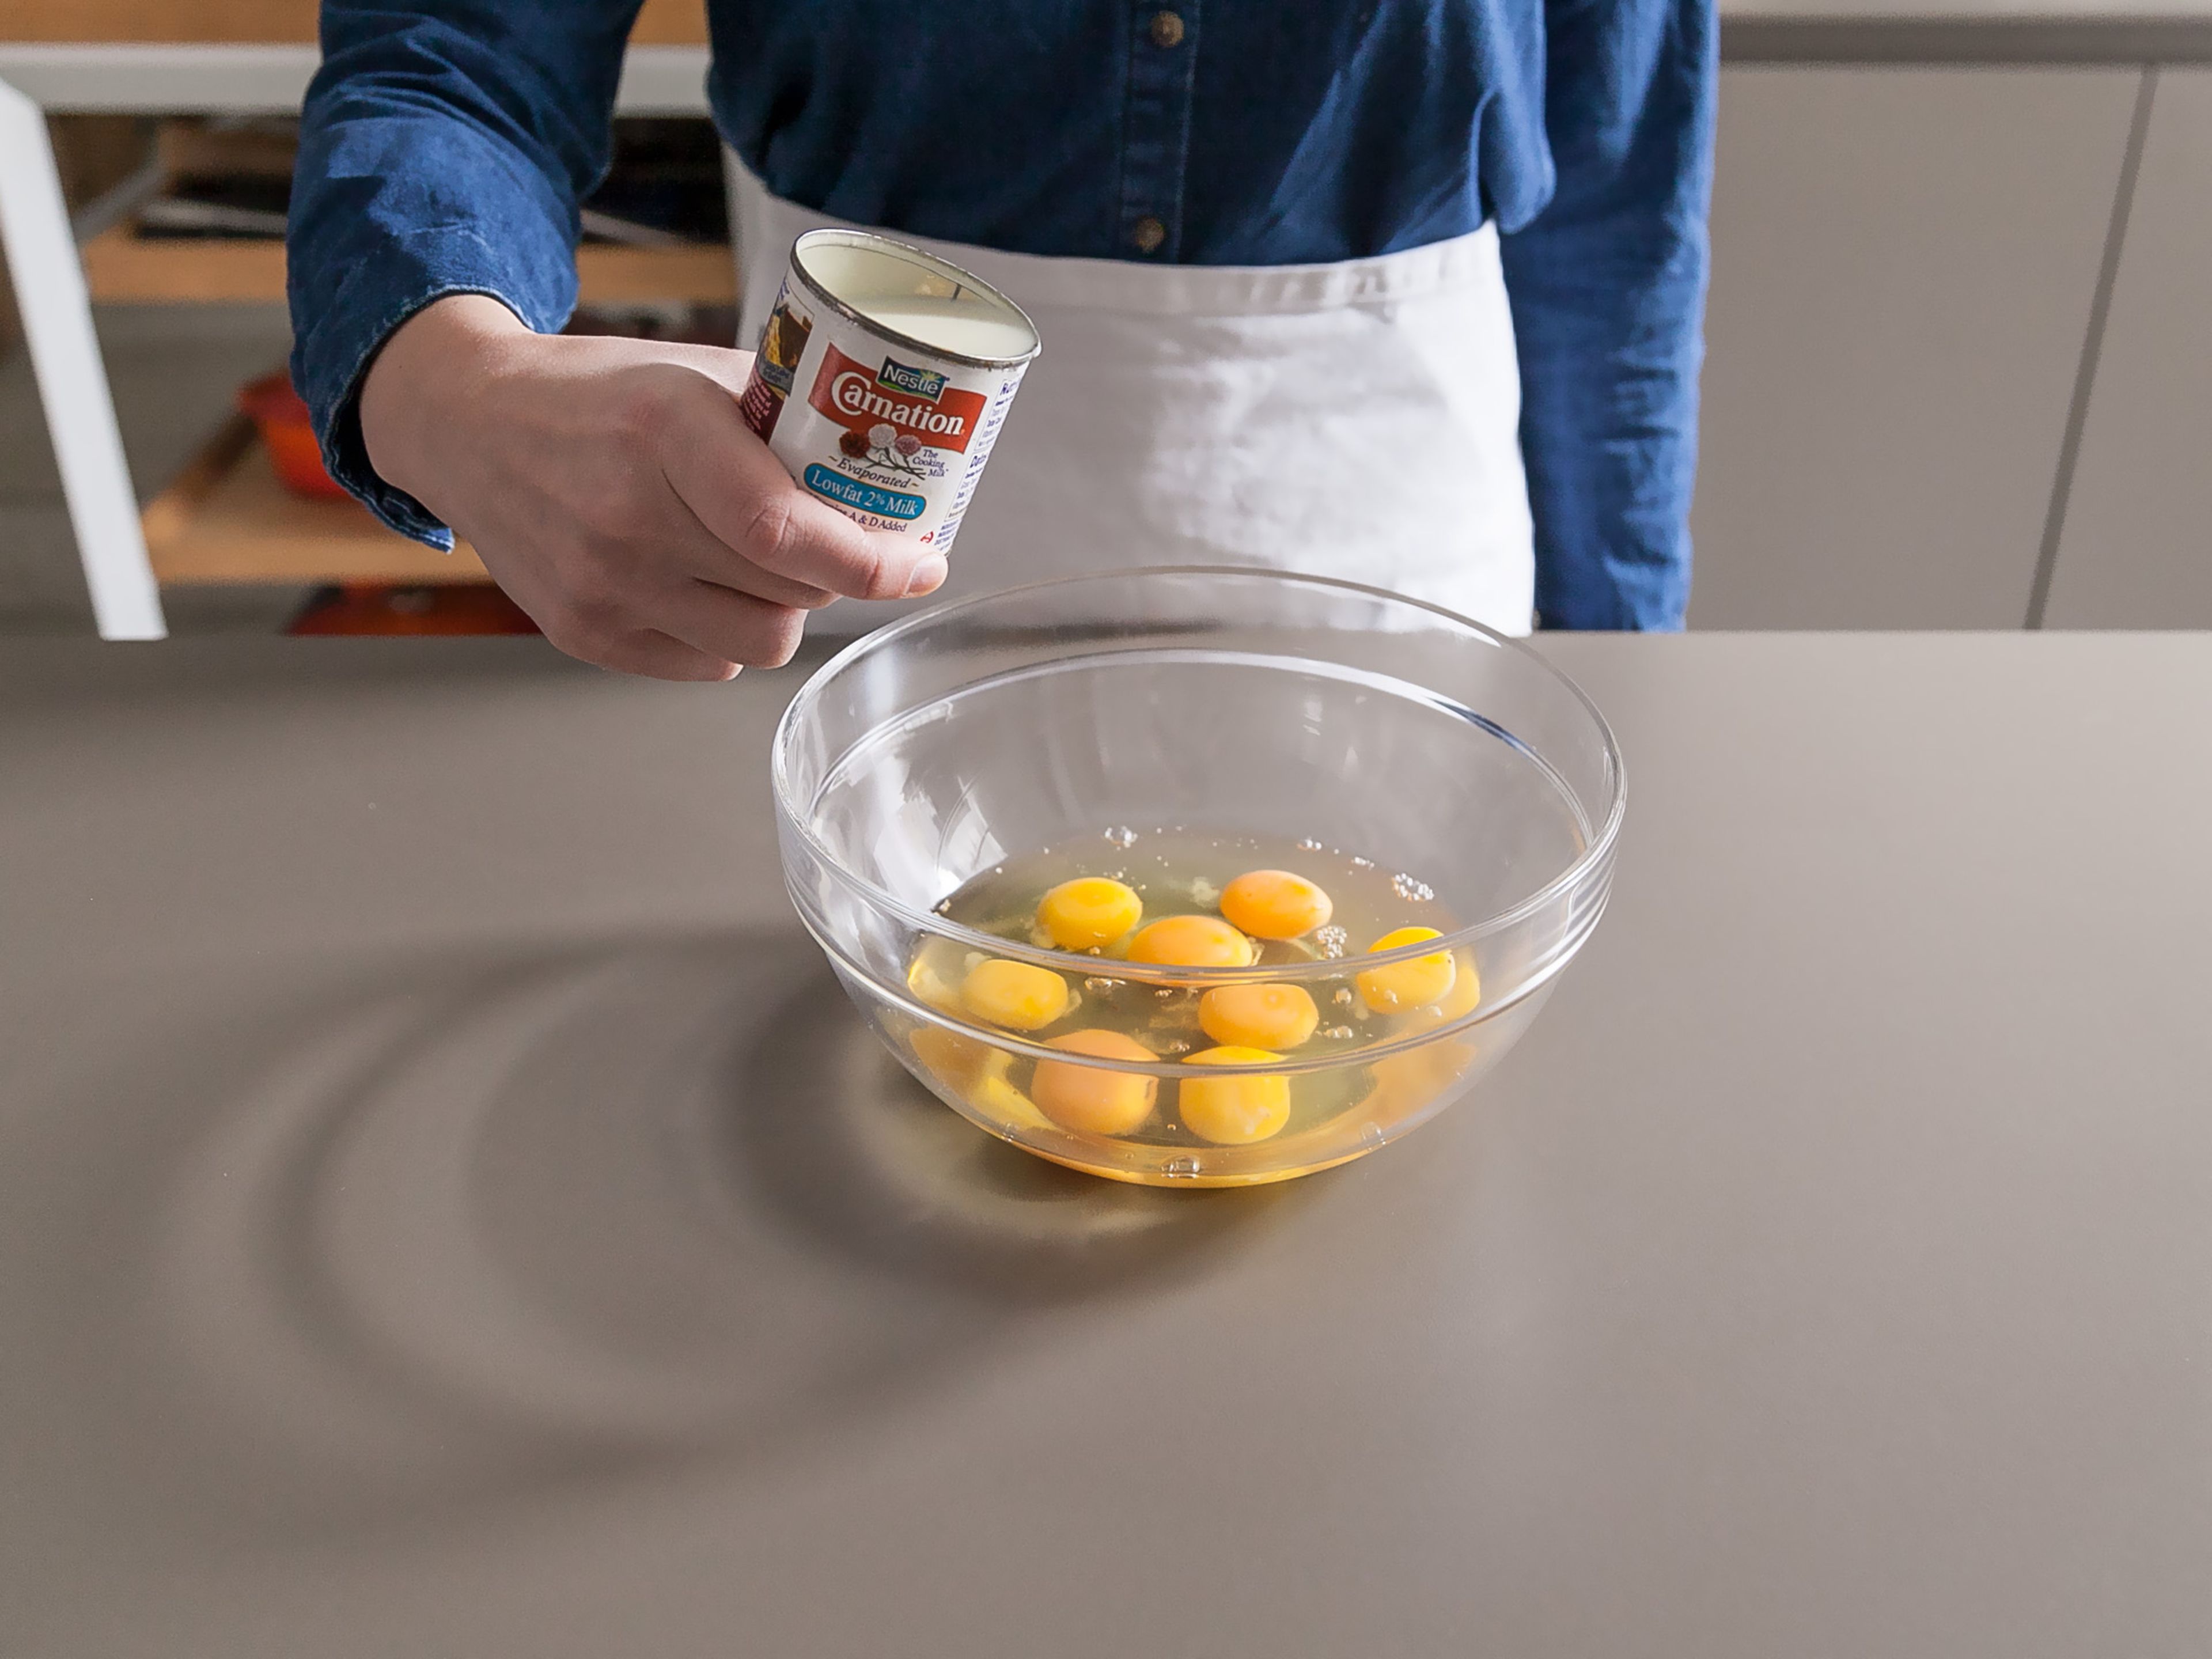 Preheat oven to 190°C/350°F. Spray muffin tin with cooking spray. Chop bell pepper and spoon into each cup. Beat eggs and evaporated milk in large bowl. Season with salt and pepper.